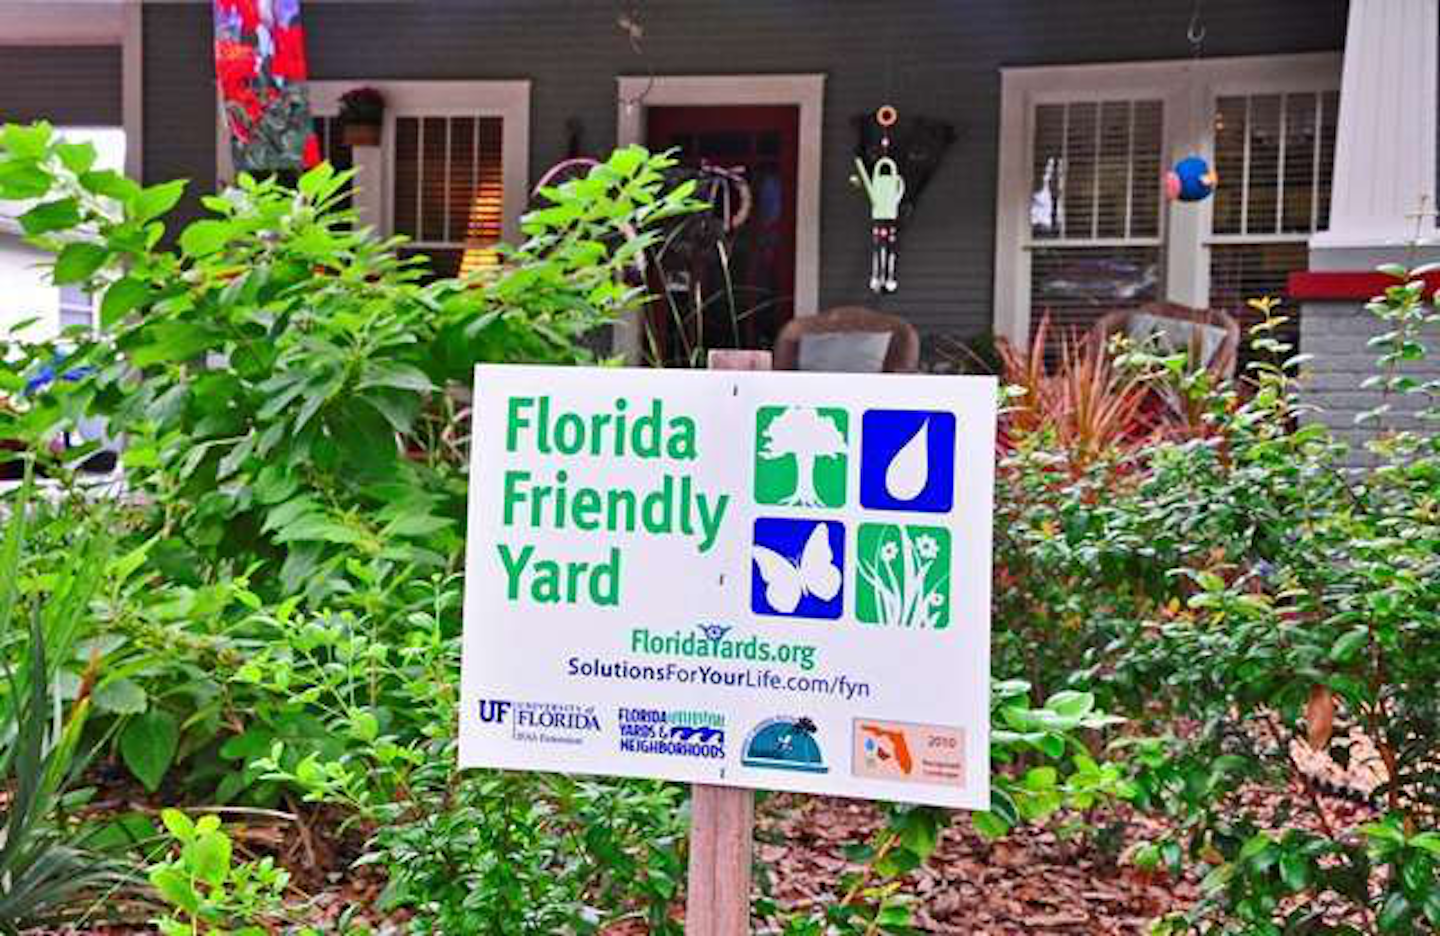 Florida Residents Deal With Lawsuits From Hoa For Landscaping Choices Total Landscape Care